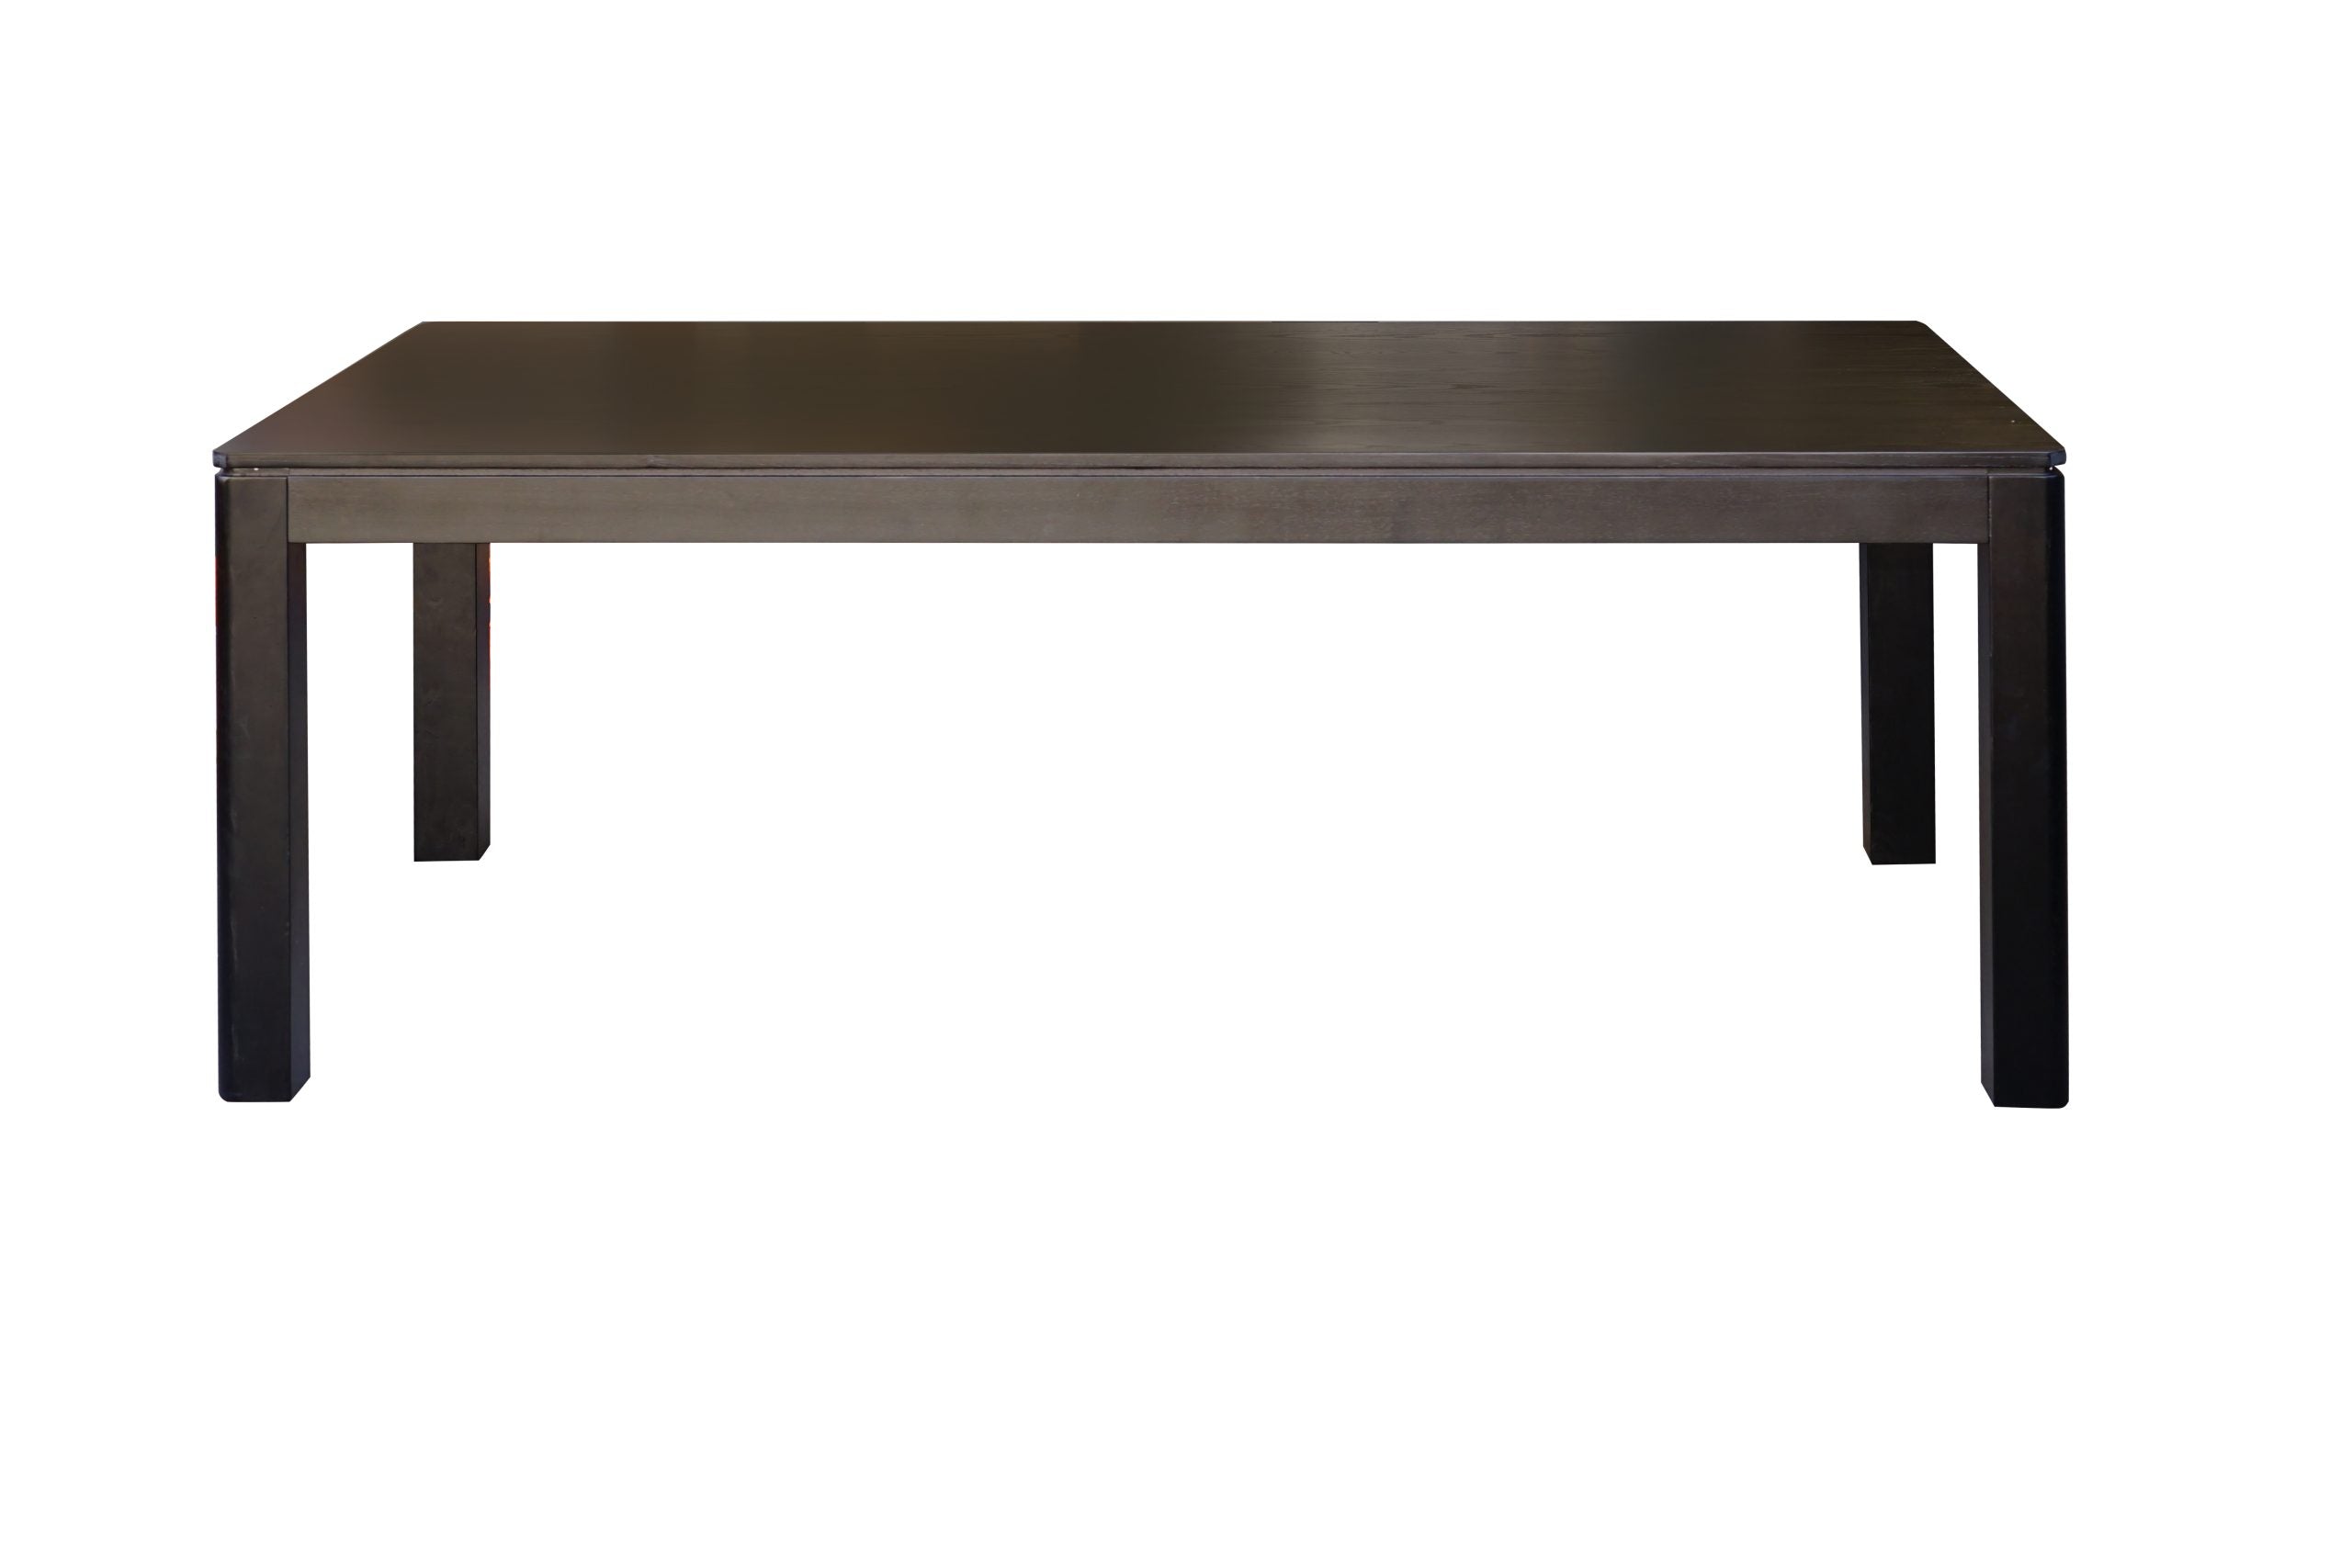 Soho 1800 x 1050 Dining table – Tables & Extension Tables from BJs Furniture Horsham